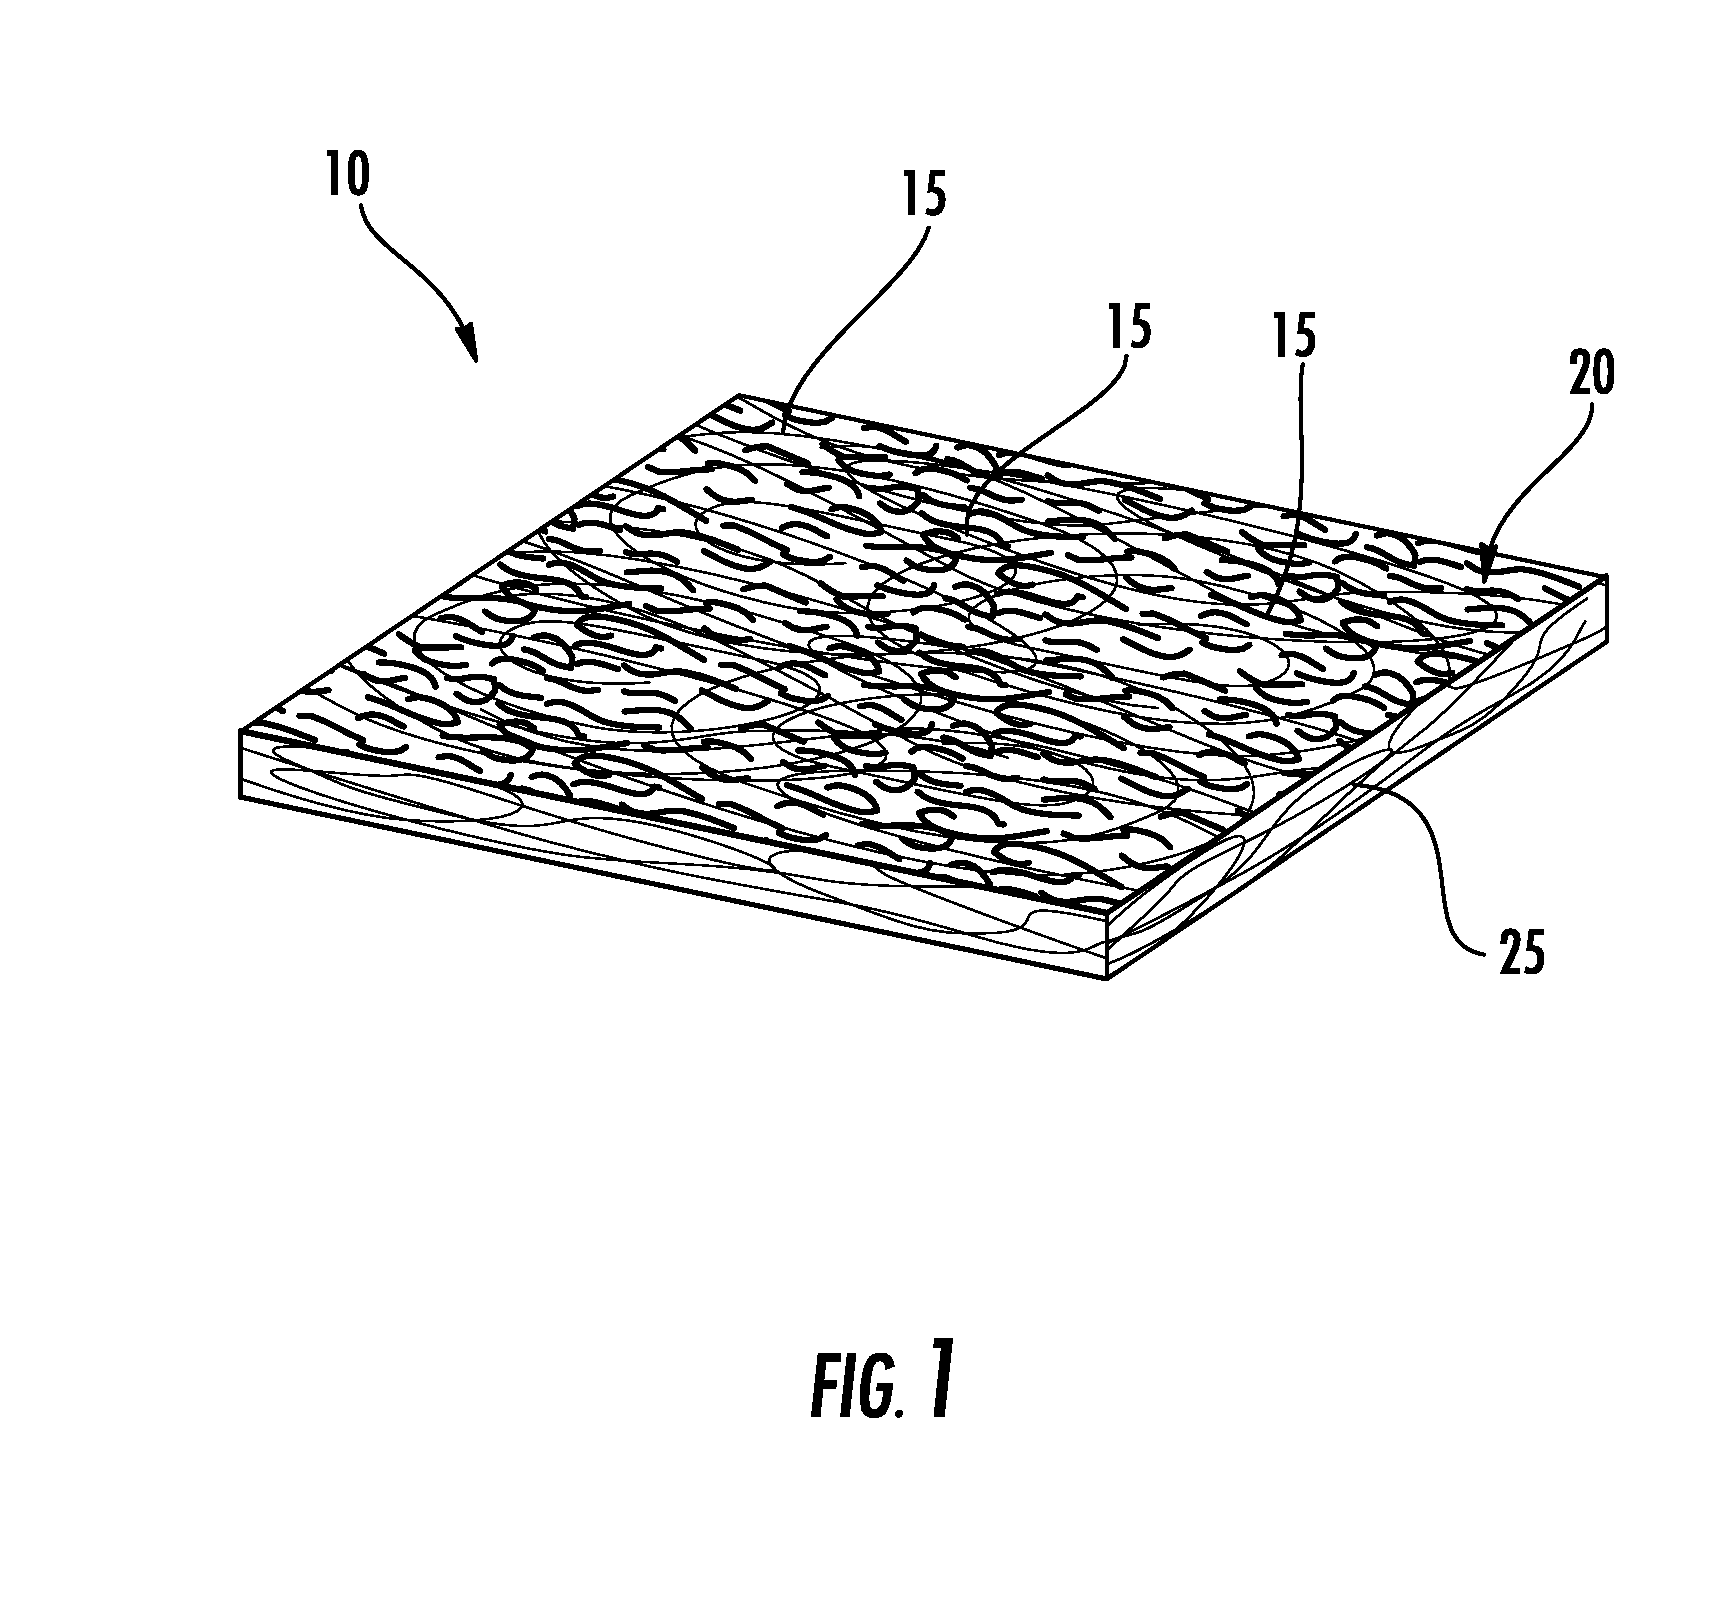 Methods of Applying Skin Wellness Agents to a Nonwoven Web Through Electrospinning Nanofibers